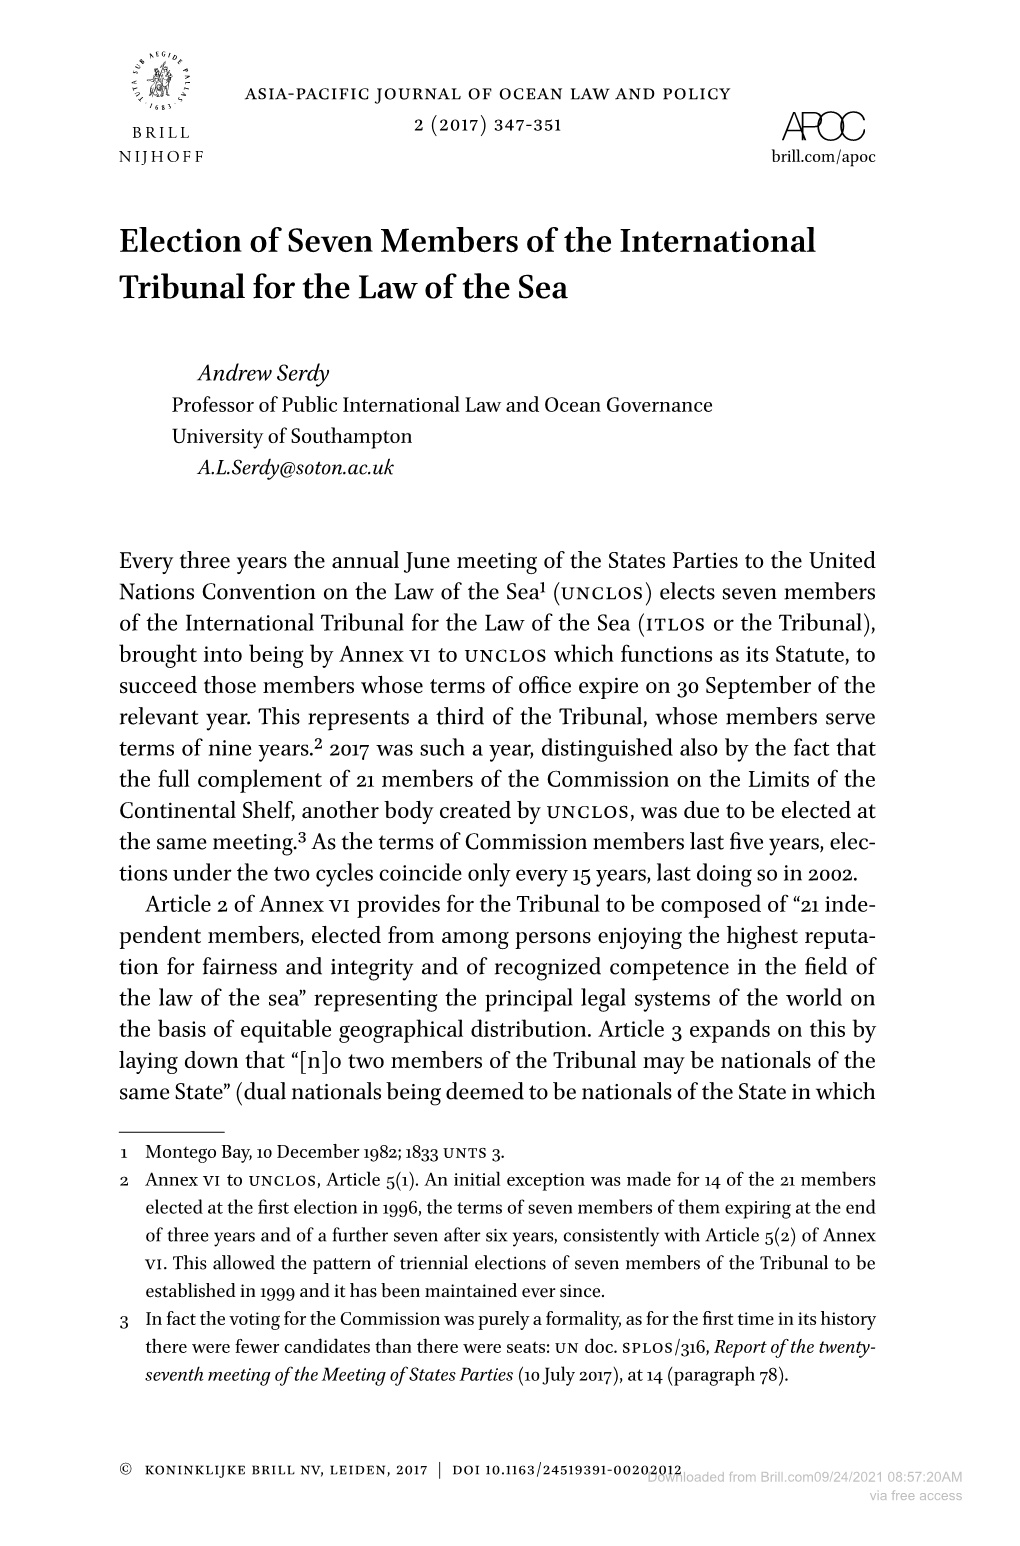 Election of Seven Members of the International Tribunal for the Law of the Sea